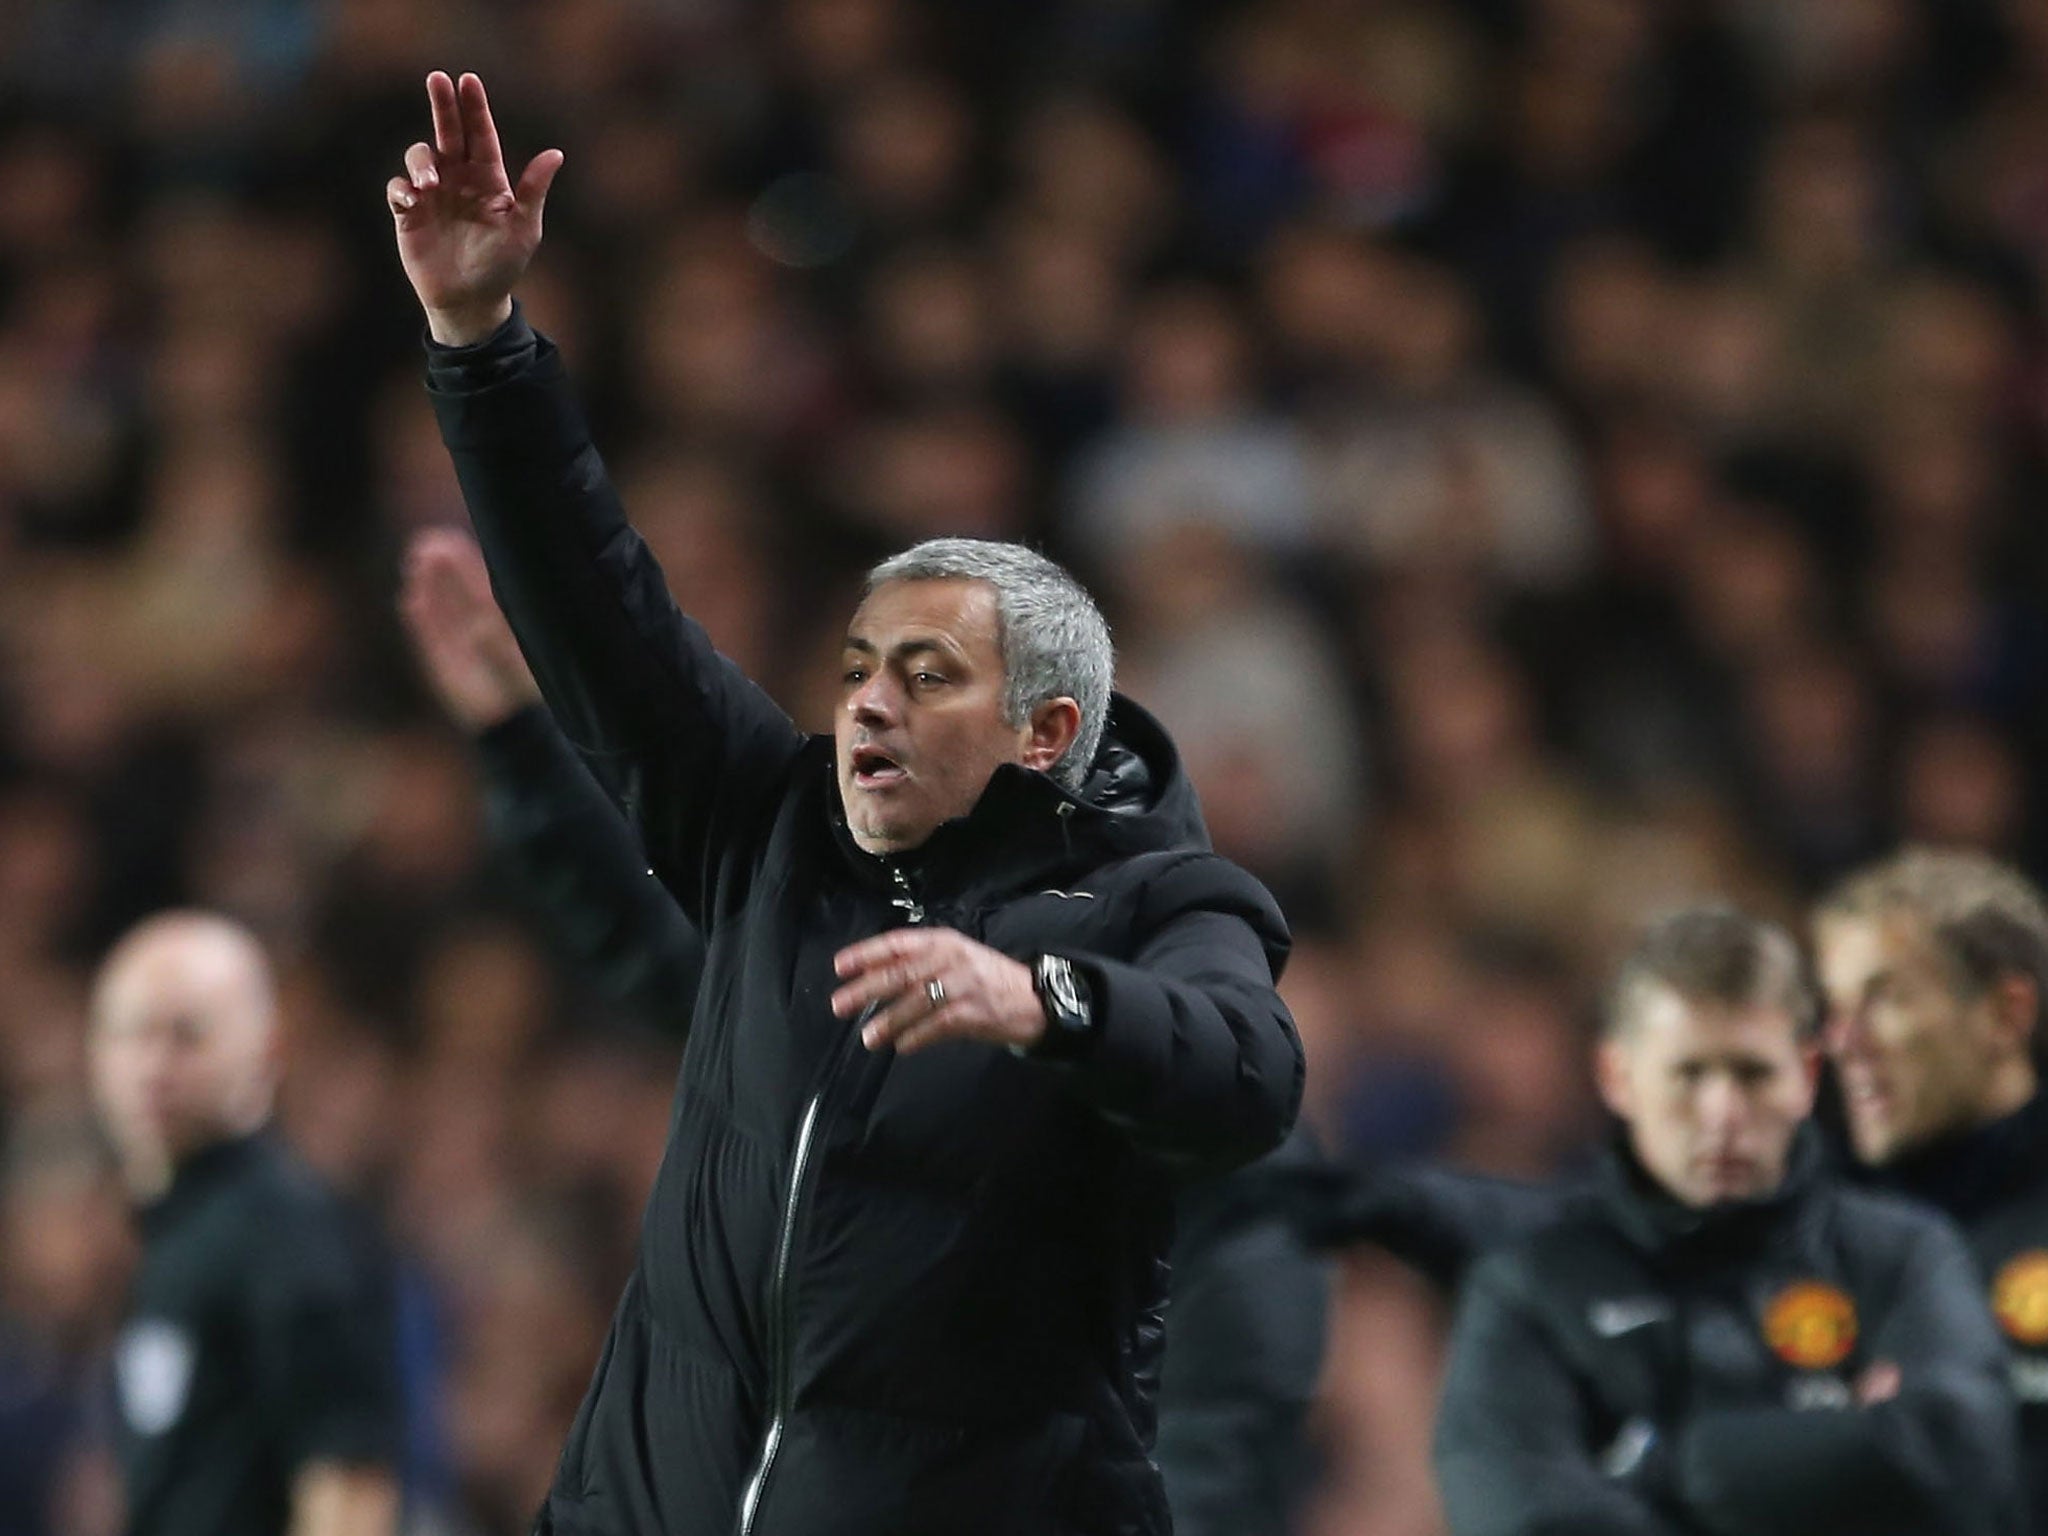 Jose Mourinho makes a gesture from the touchline during Chelsea's 3-1 win over Manchester United on Sunday